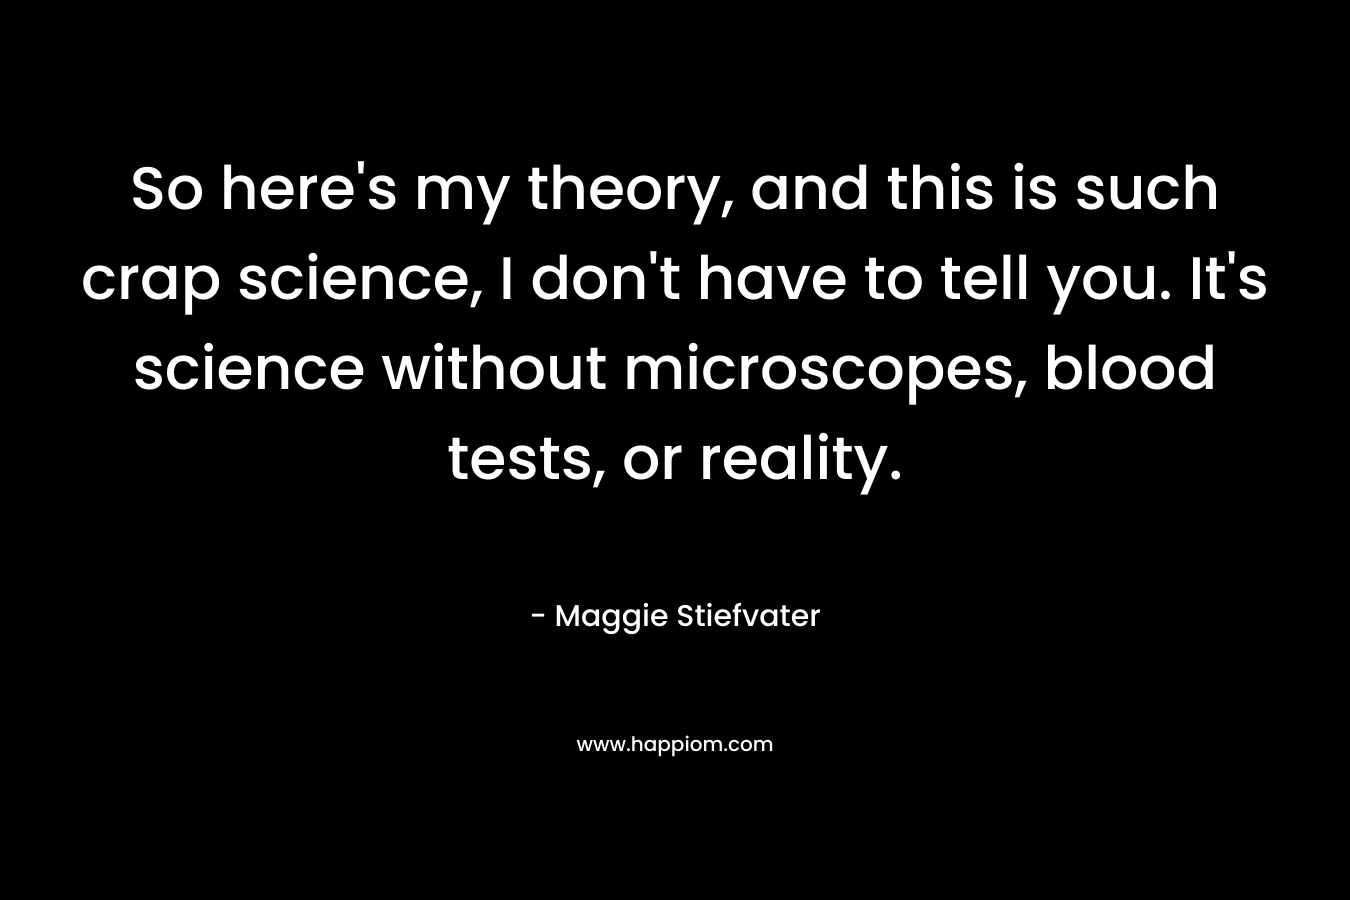 So here’s my theory, and this is such crap science, I don’t have to tell you. It’s science without microscopes, blood tests, or reality. – Maggie Stiefvater